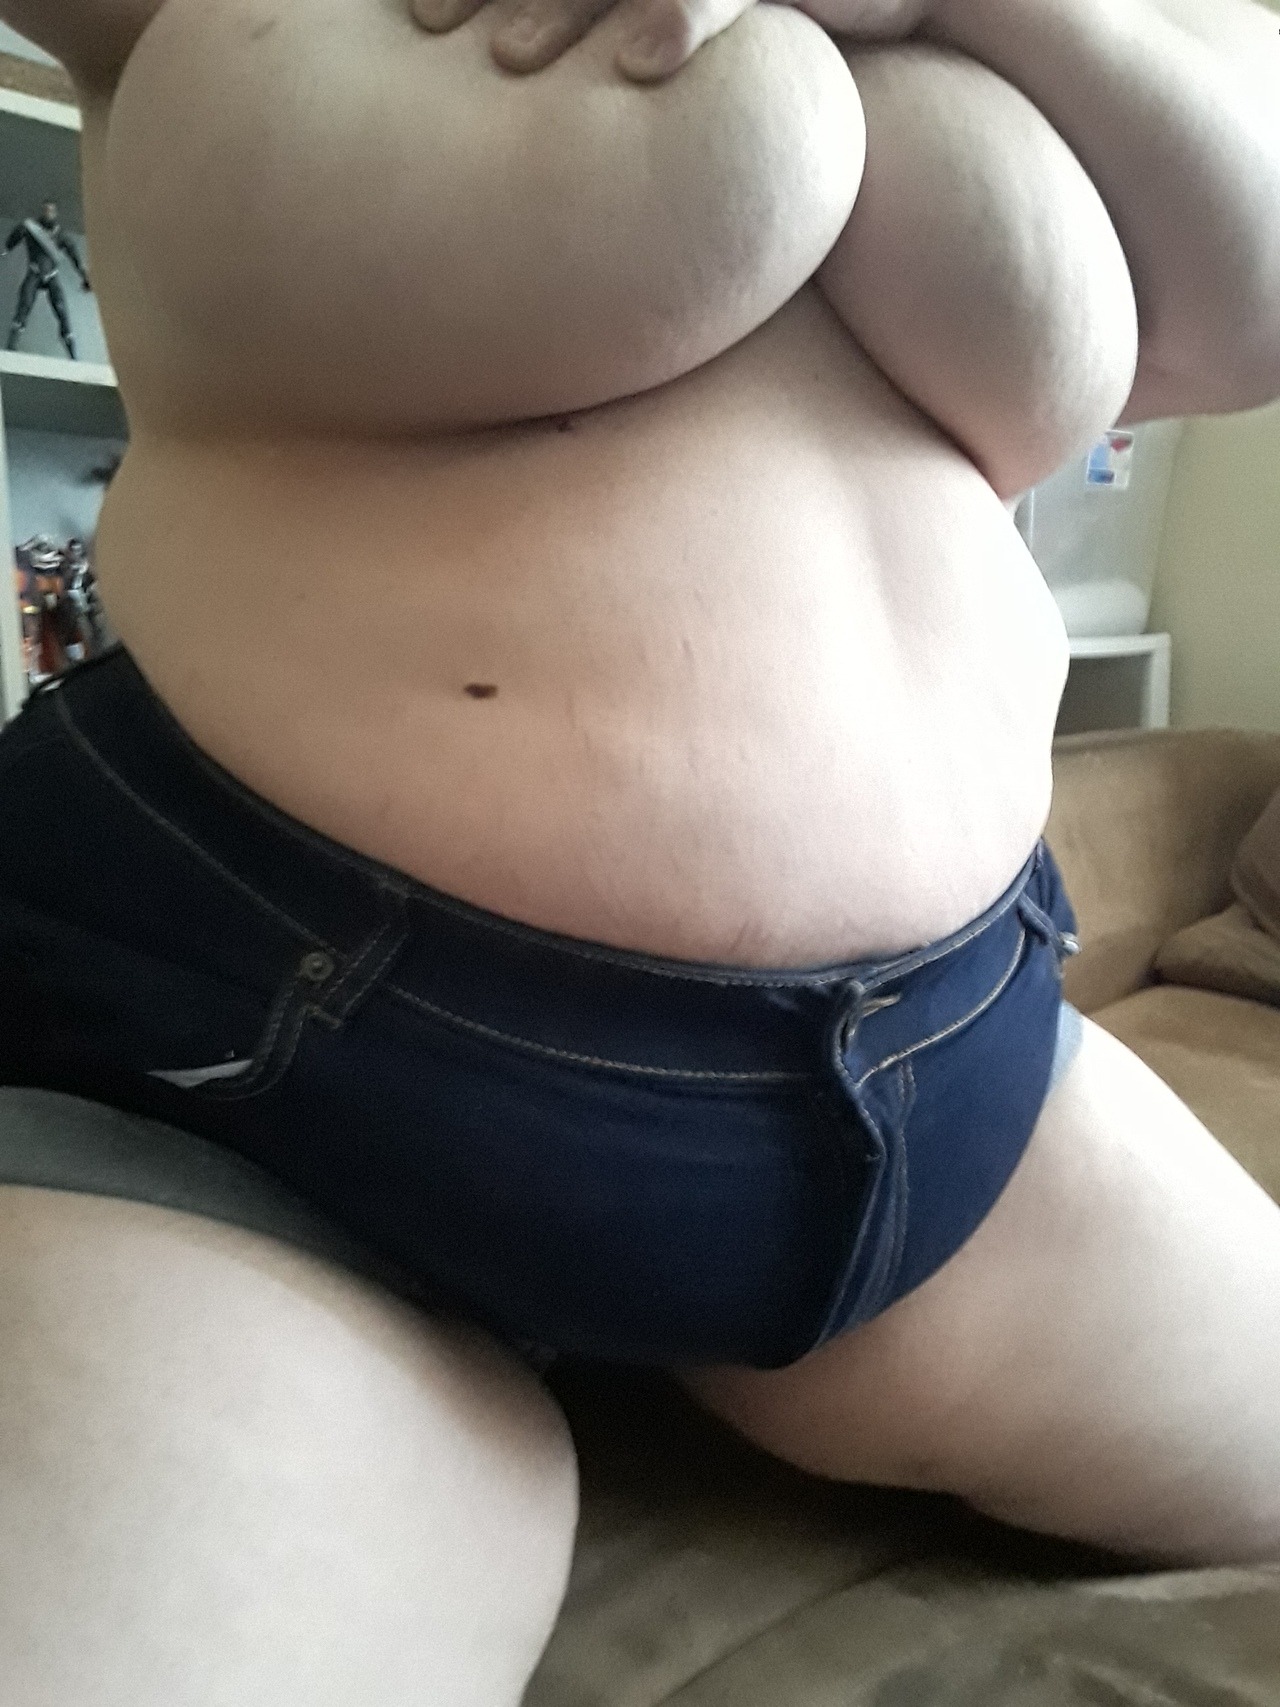 hannahs-voice:Jean shorts, yes or no?